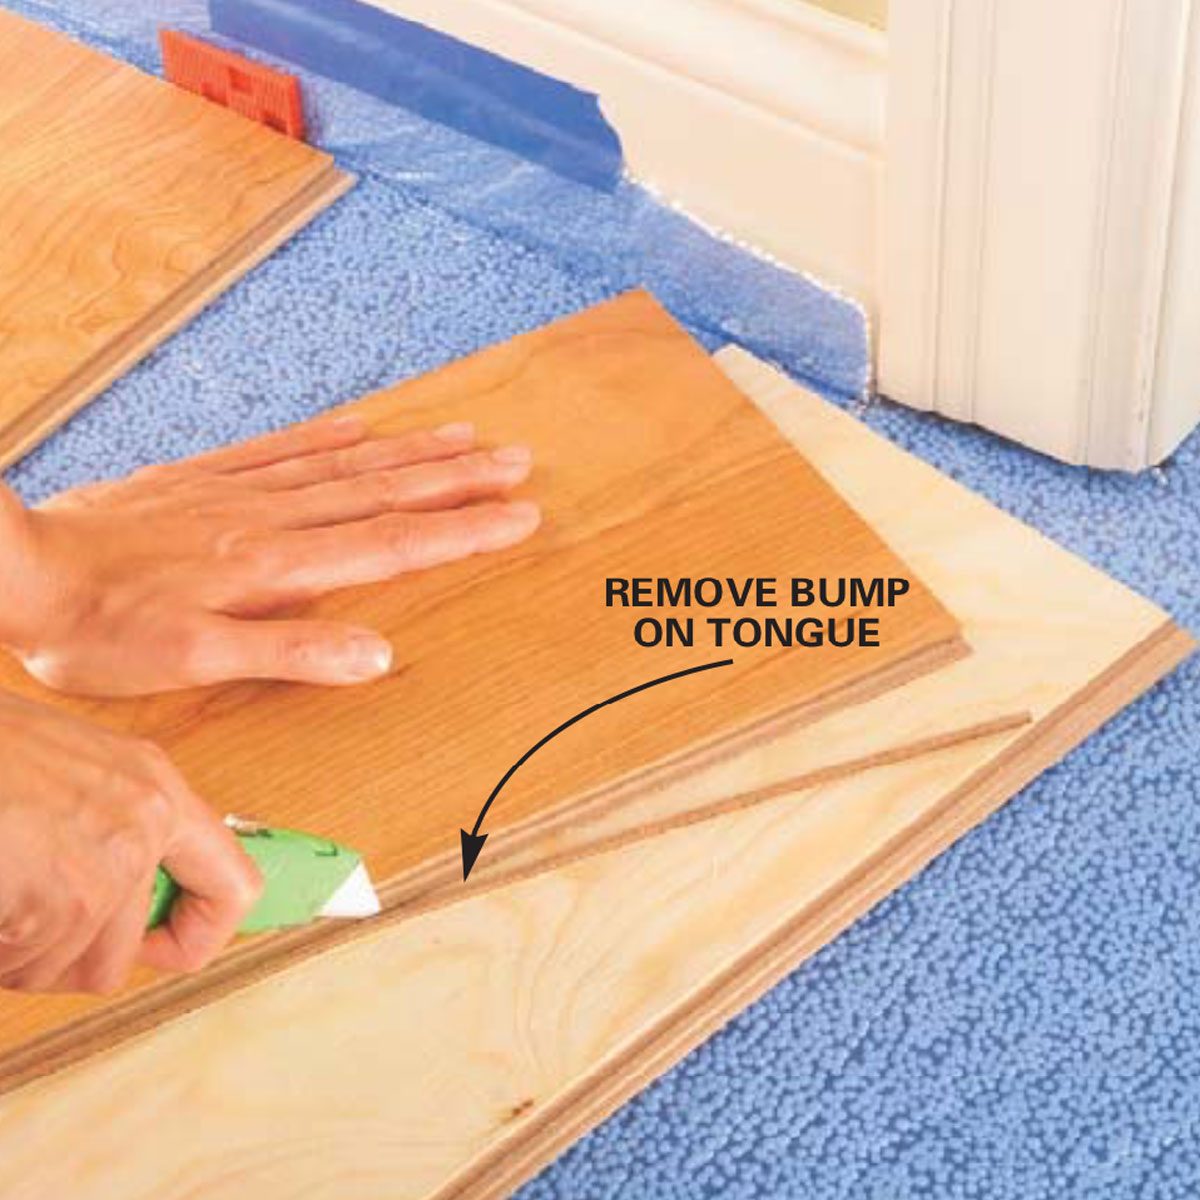 How to Install Laminate Flooring for beginners 